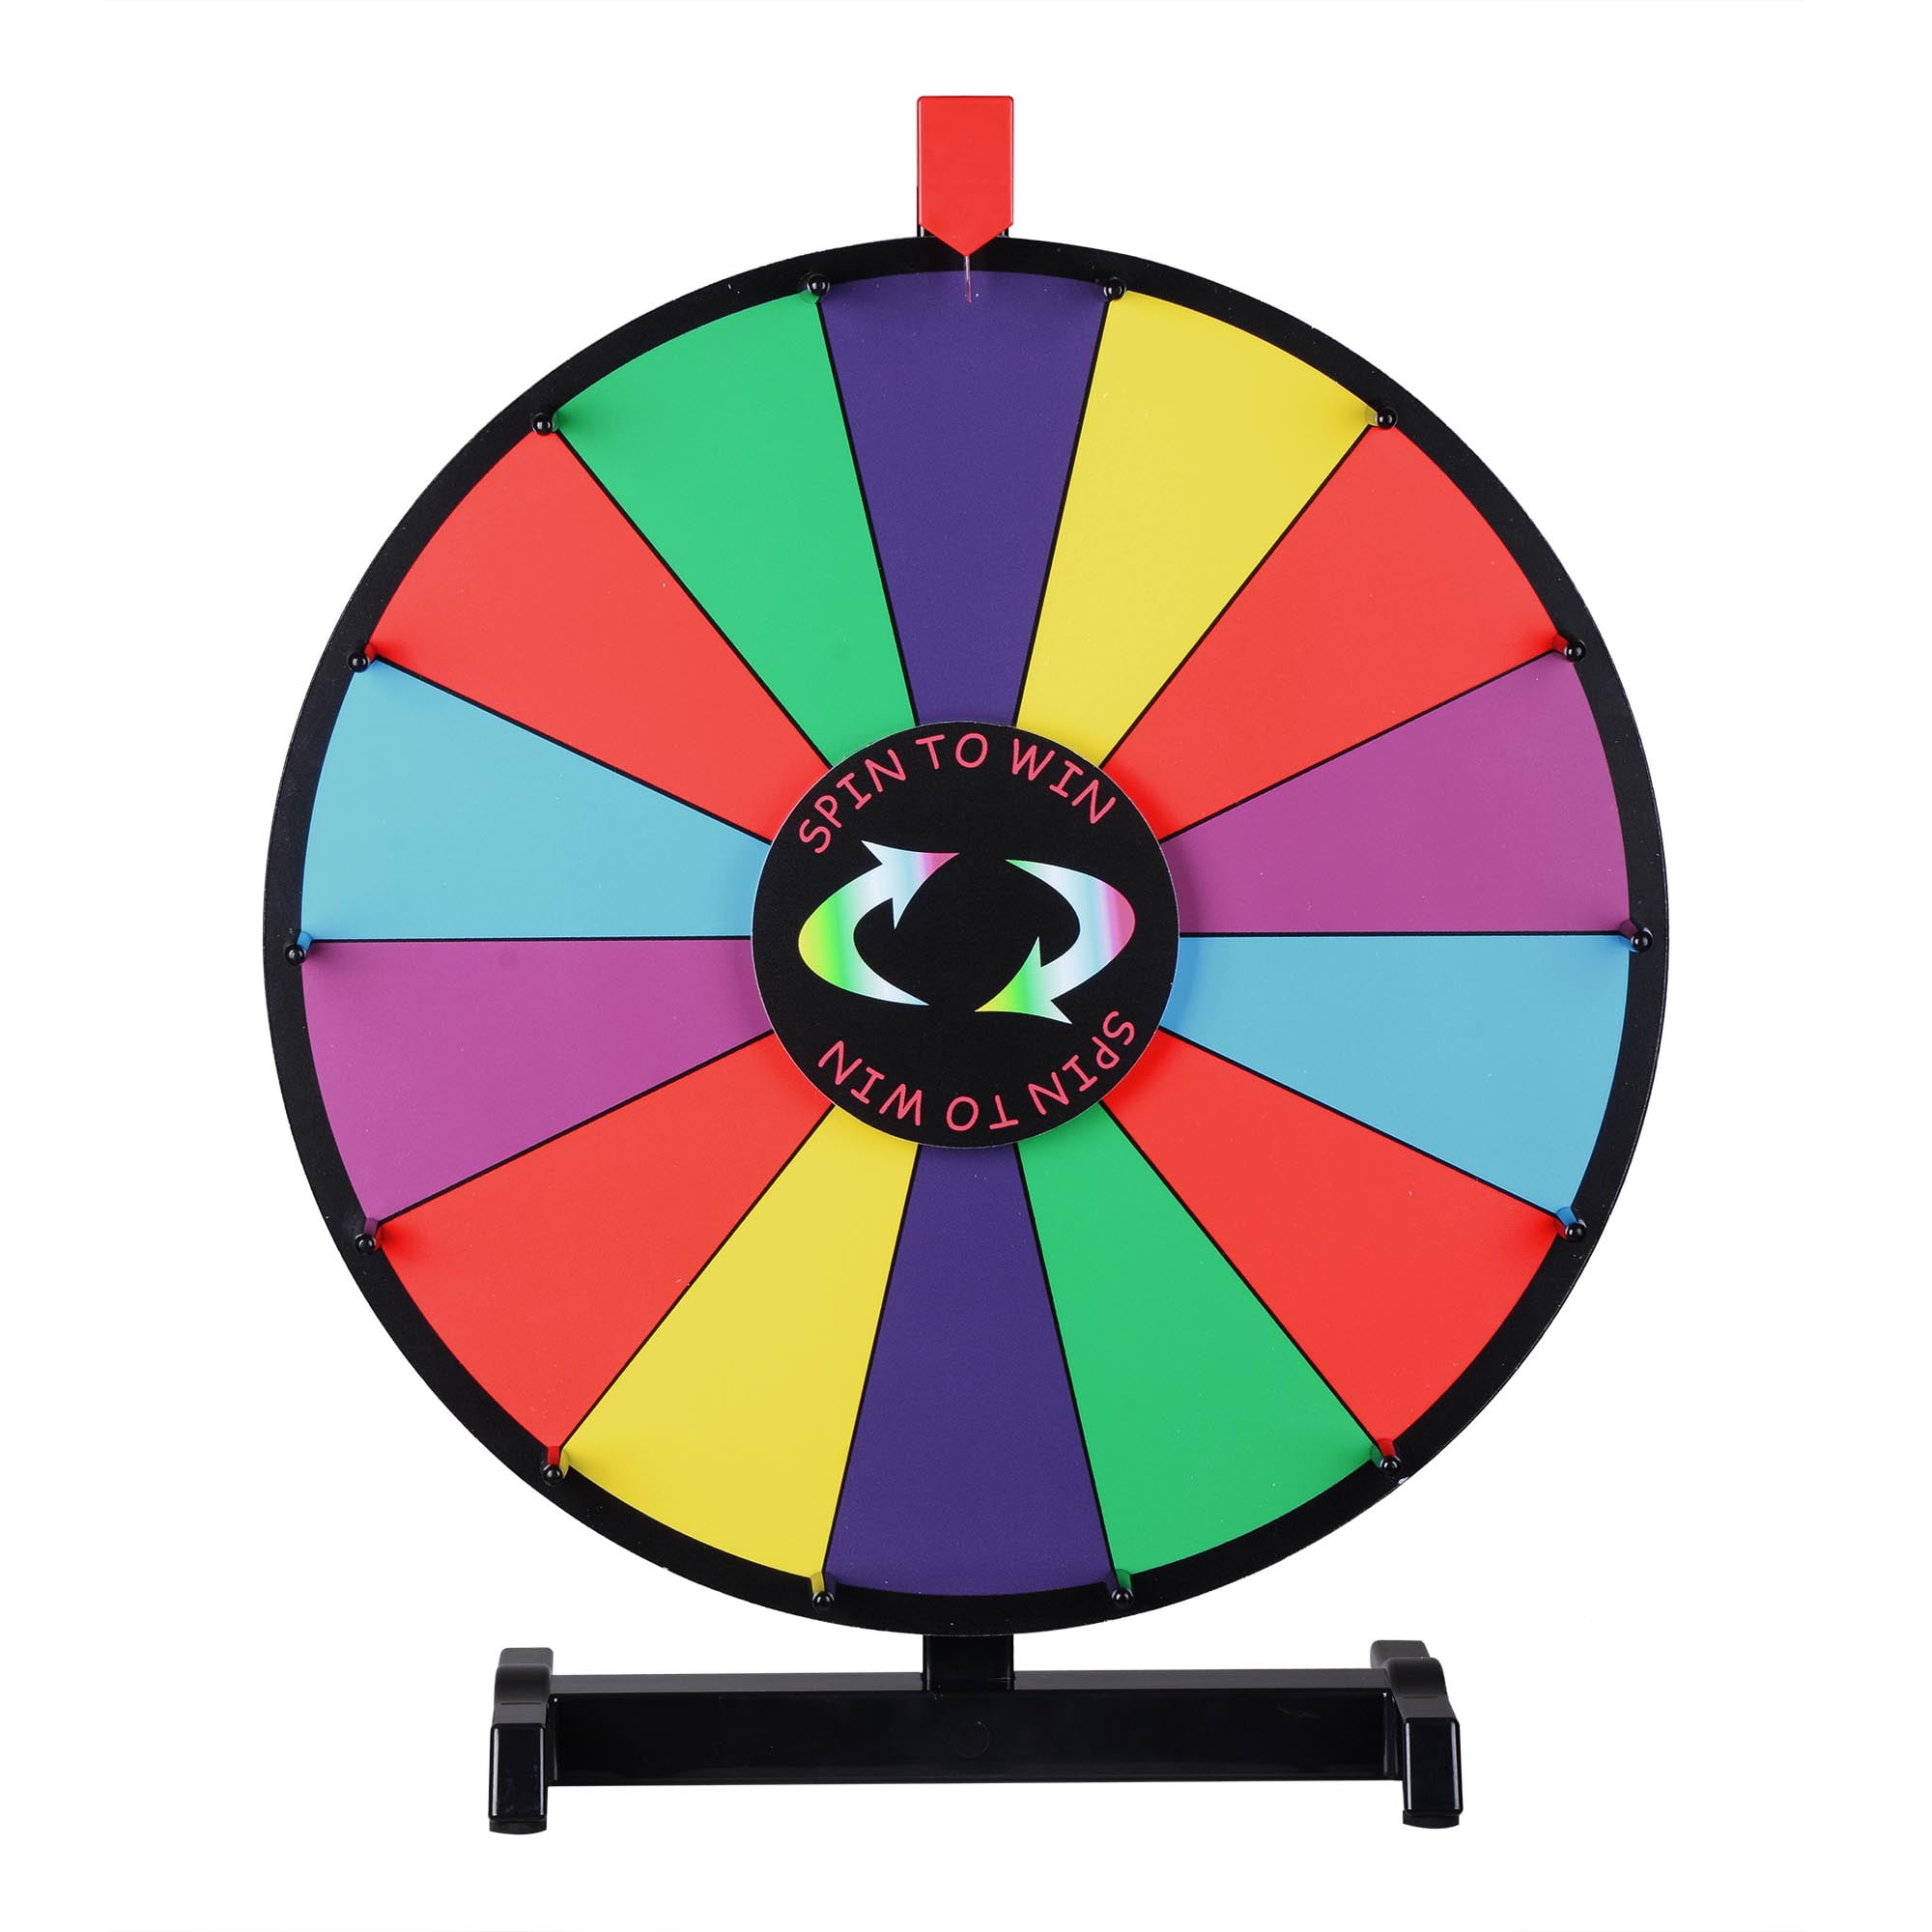 experience stockings rare WinSpin 18 Inch Tabletop Color Prize Wheel 14 Slots Editable Fortune  Carnival Spinning Game - Walmart.com